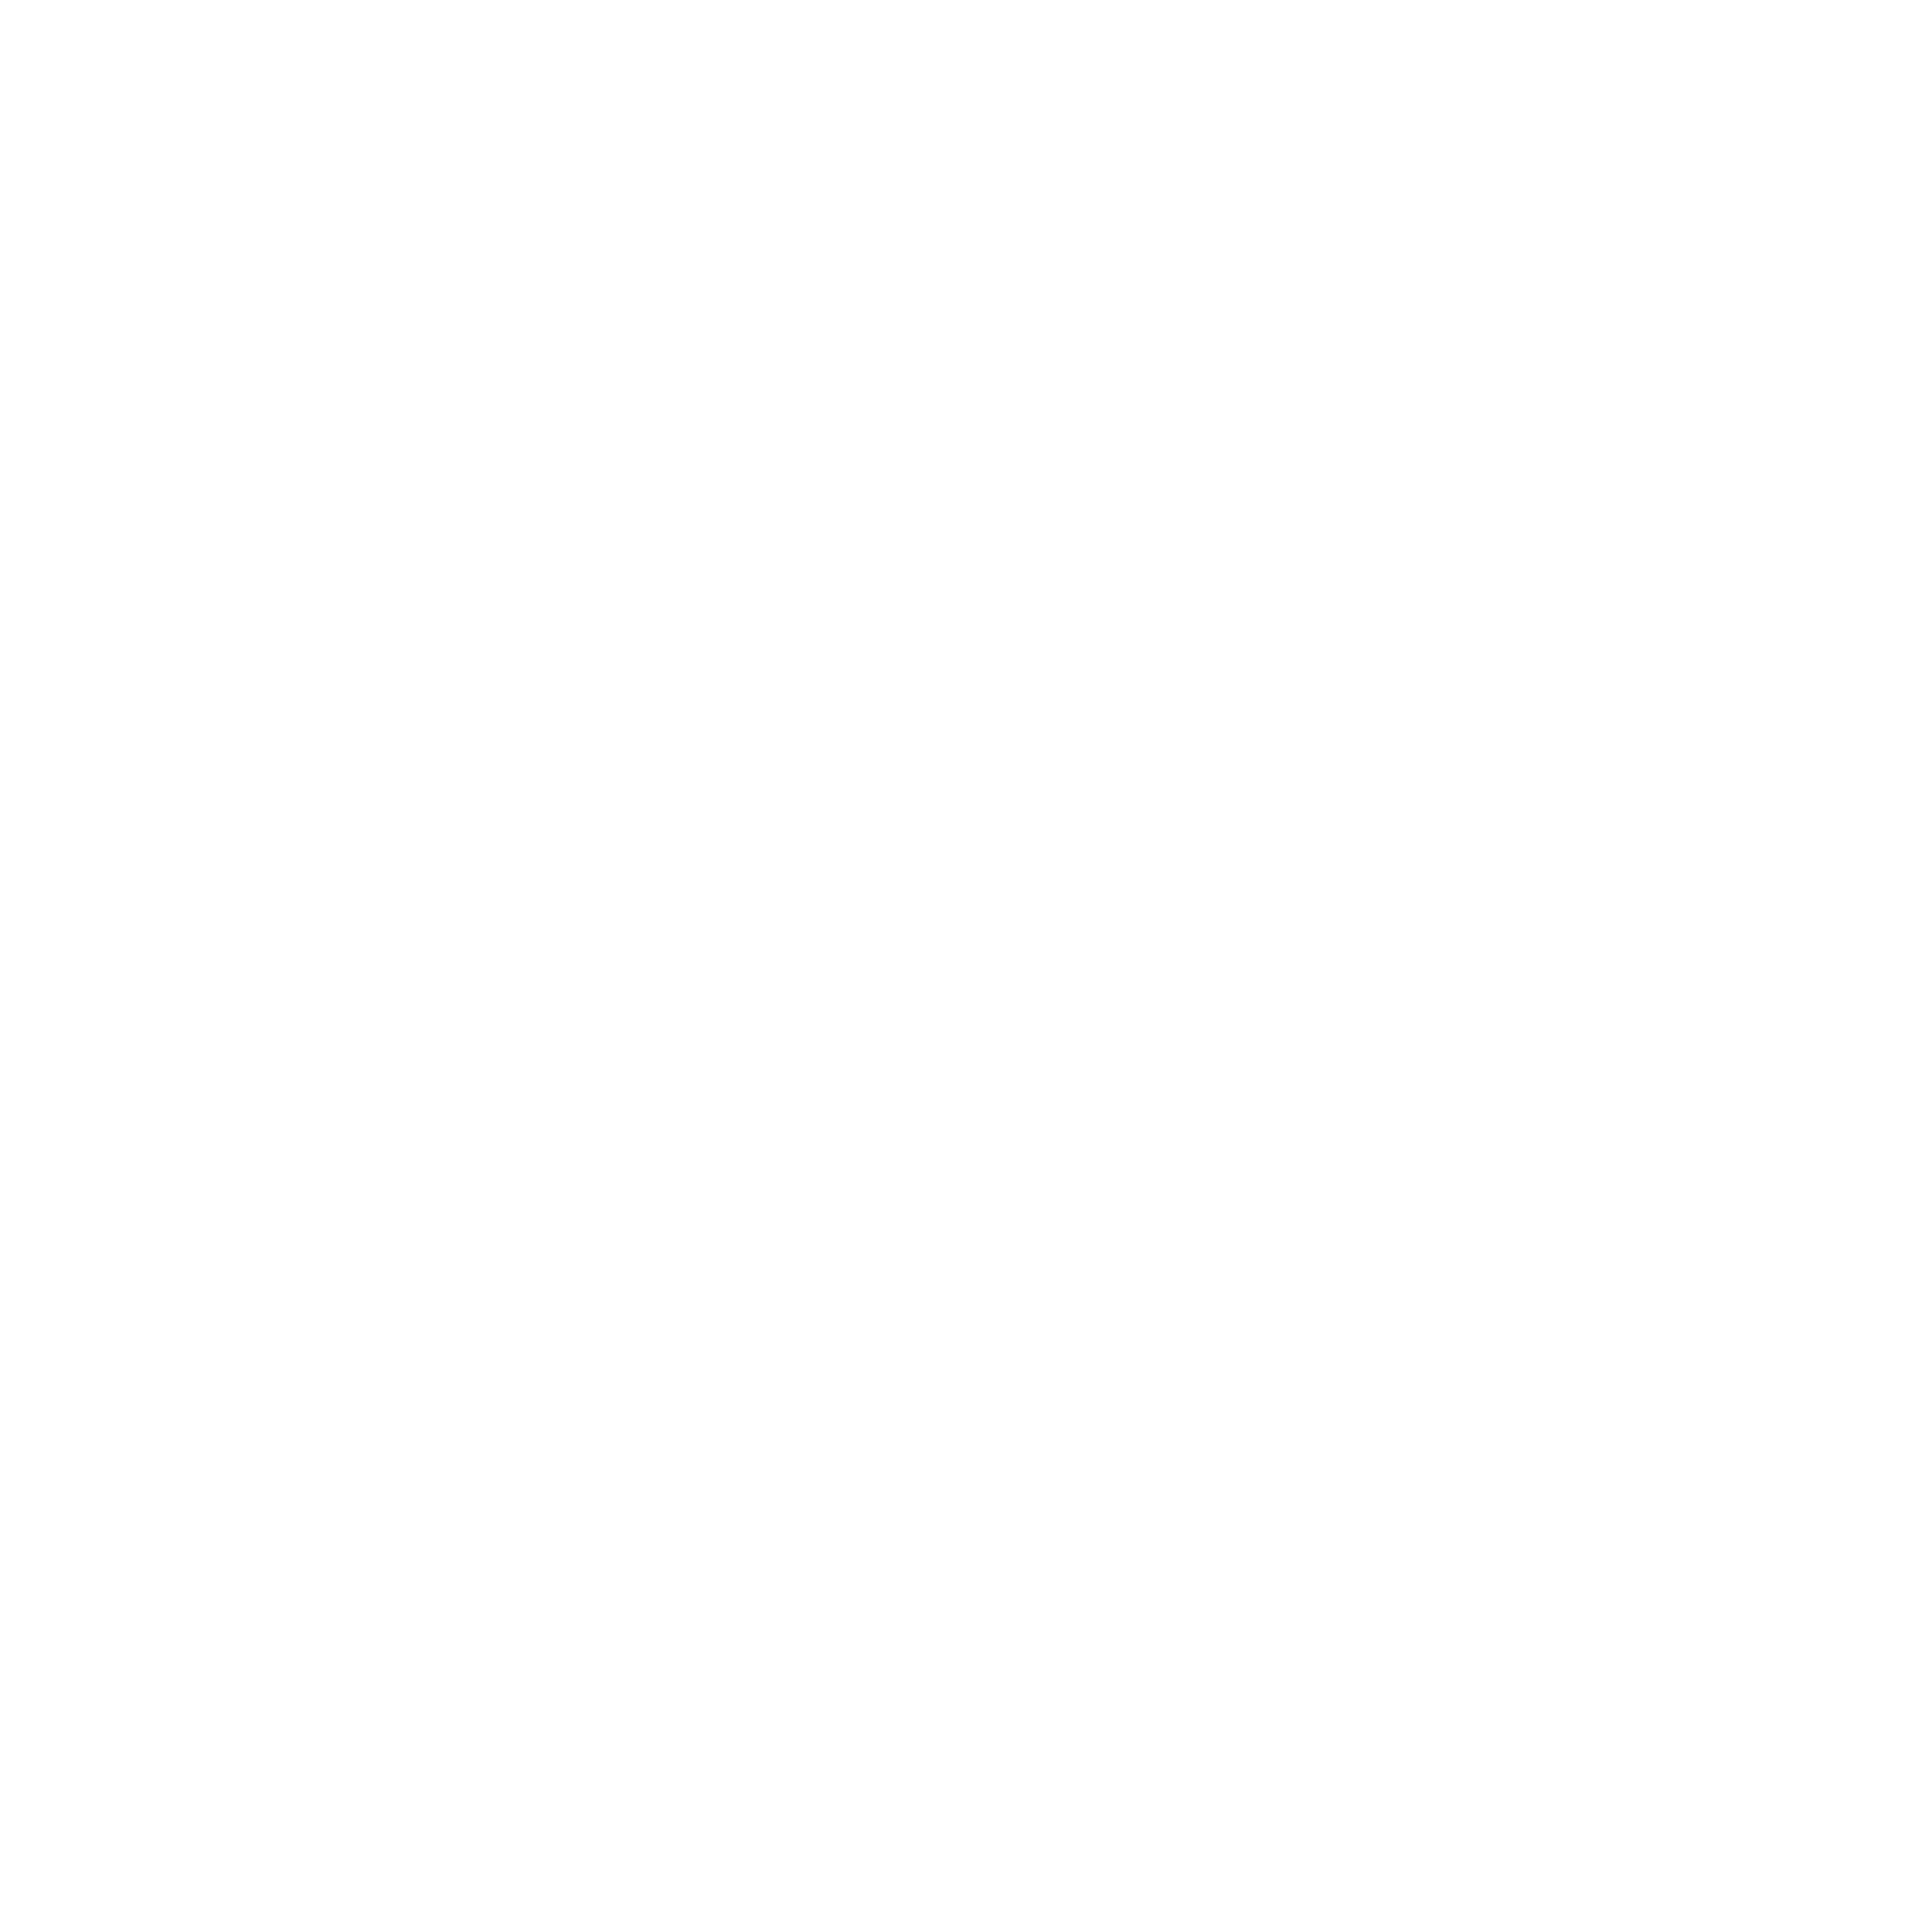 The Paramount Home